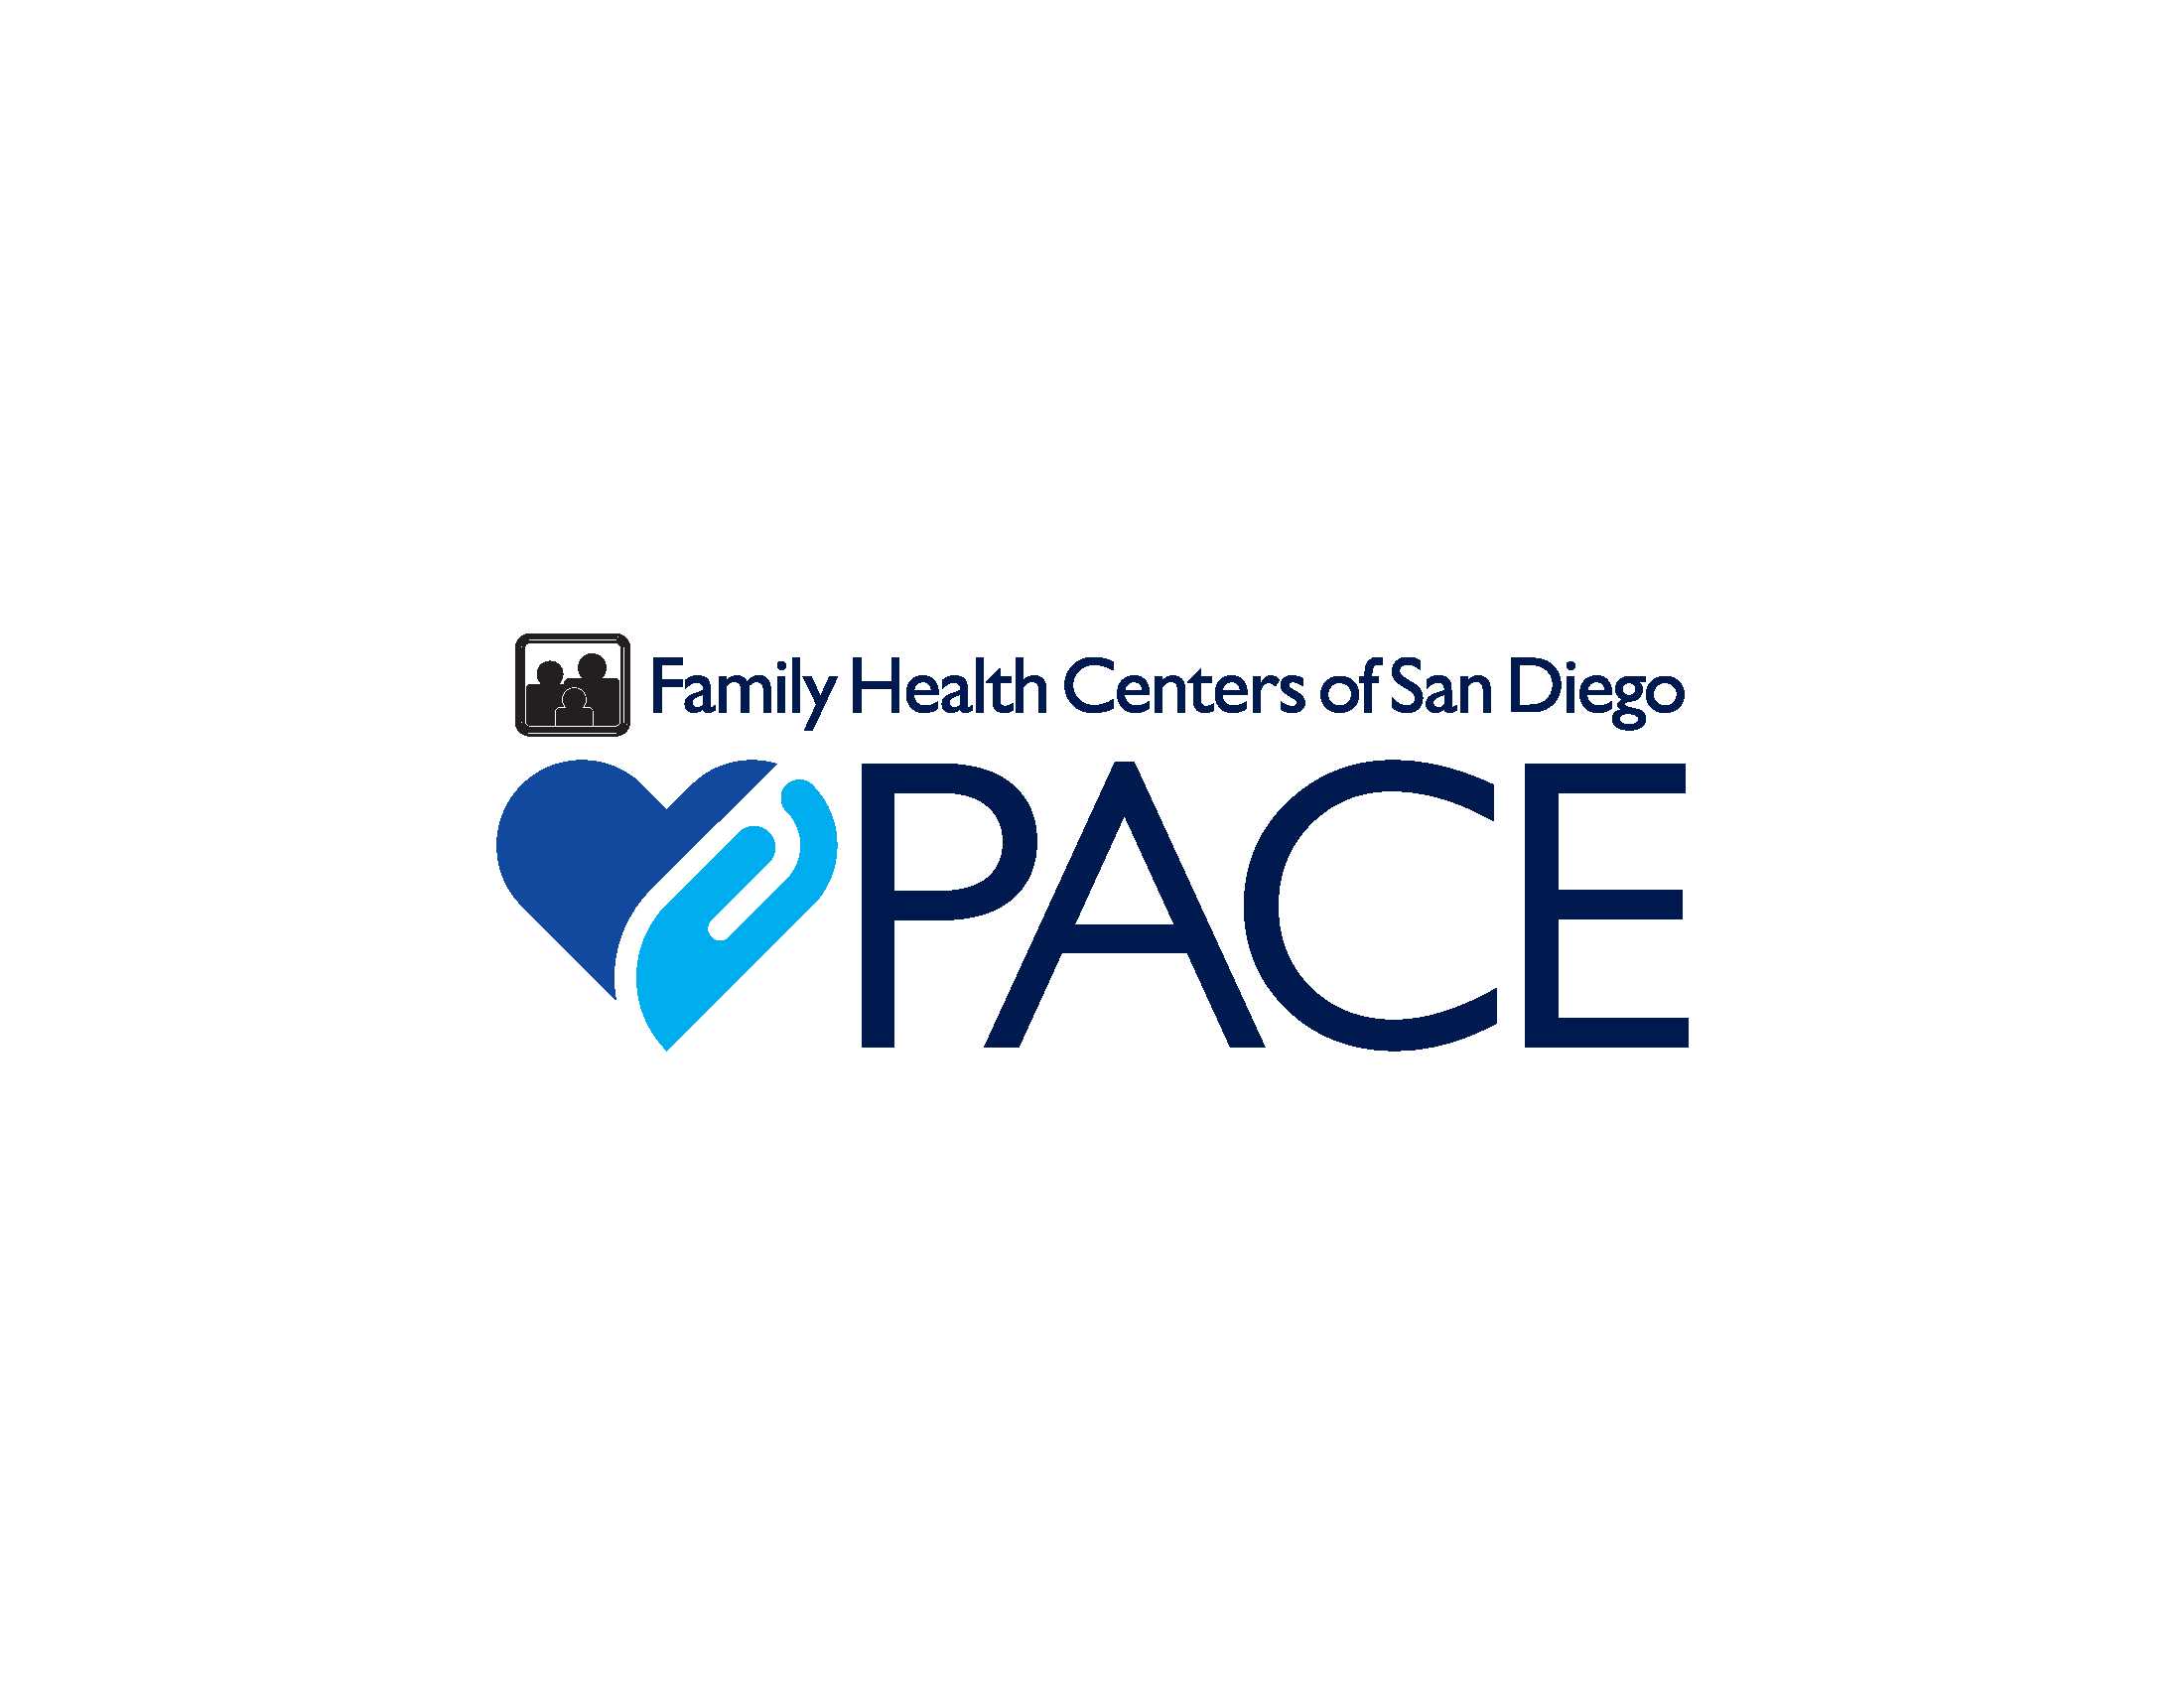 Family Health Centers of San Diego PACE